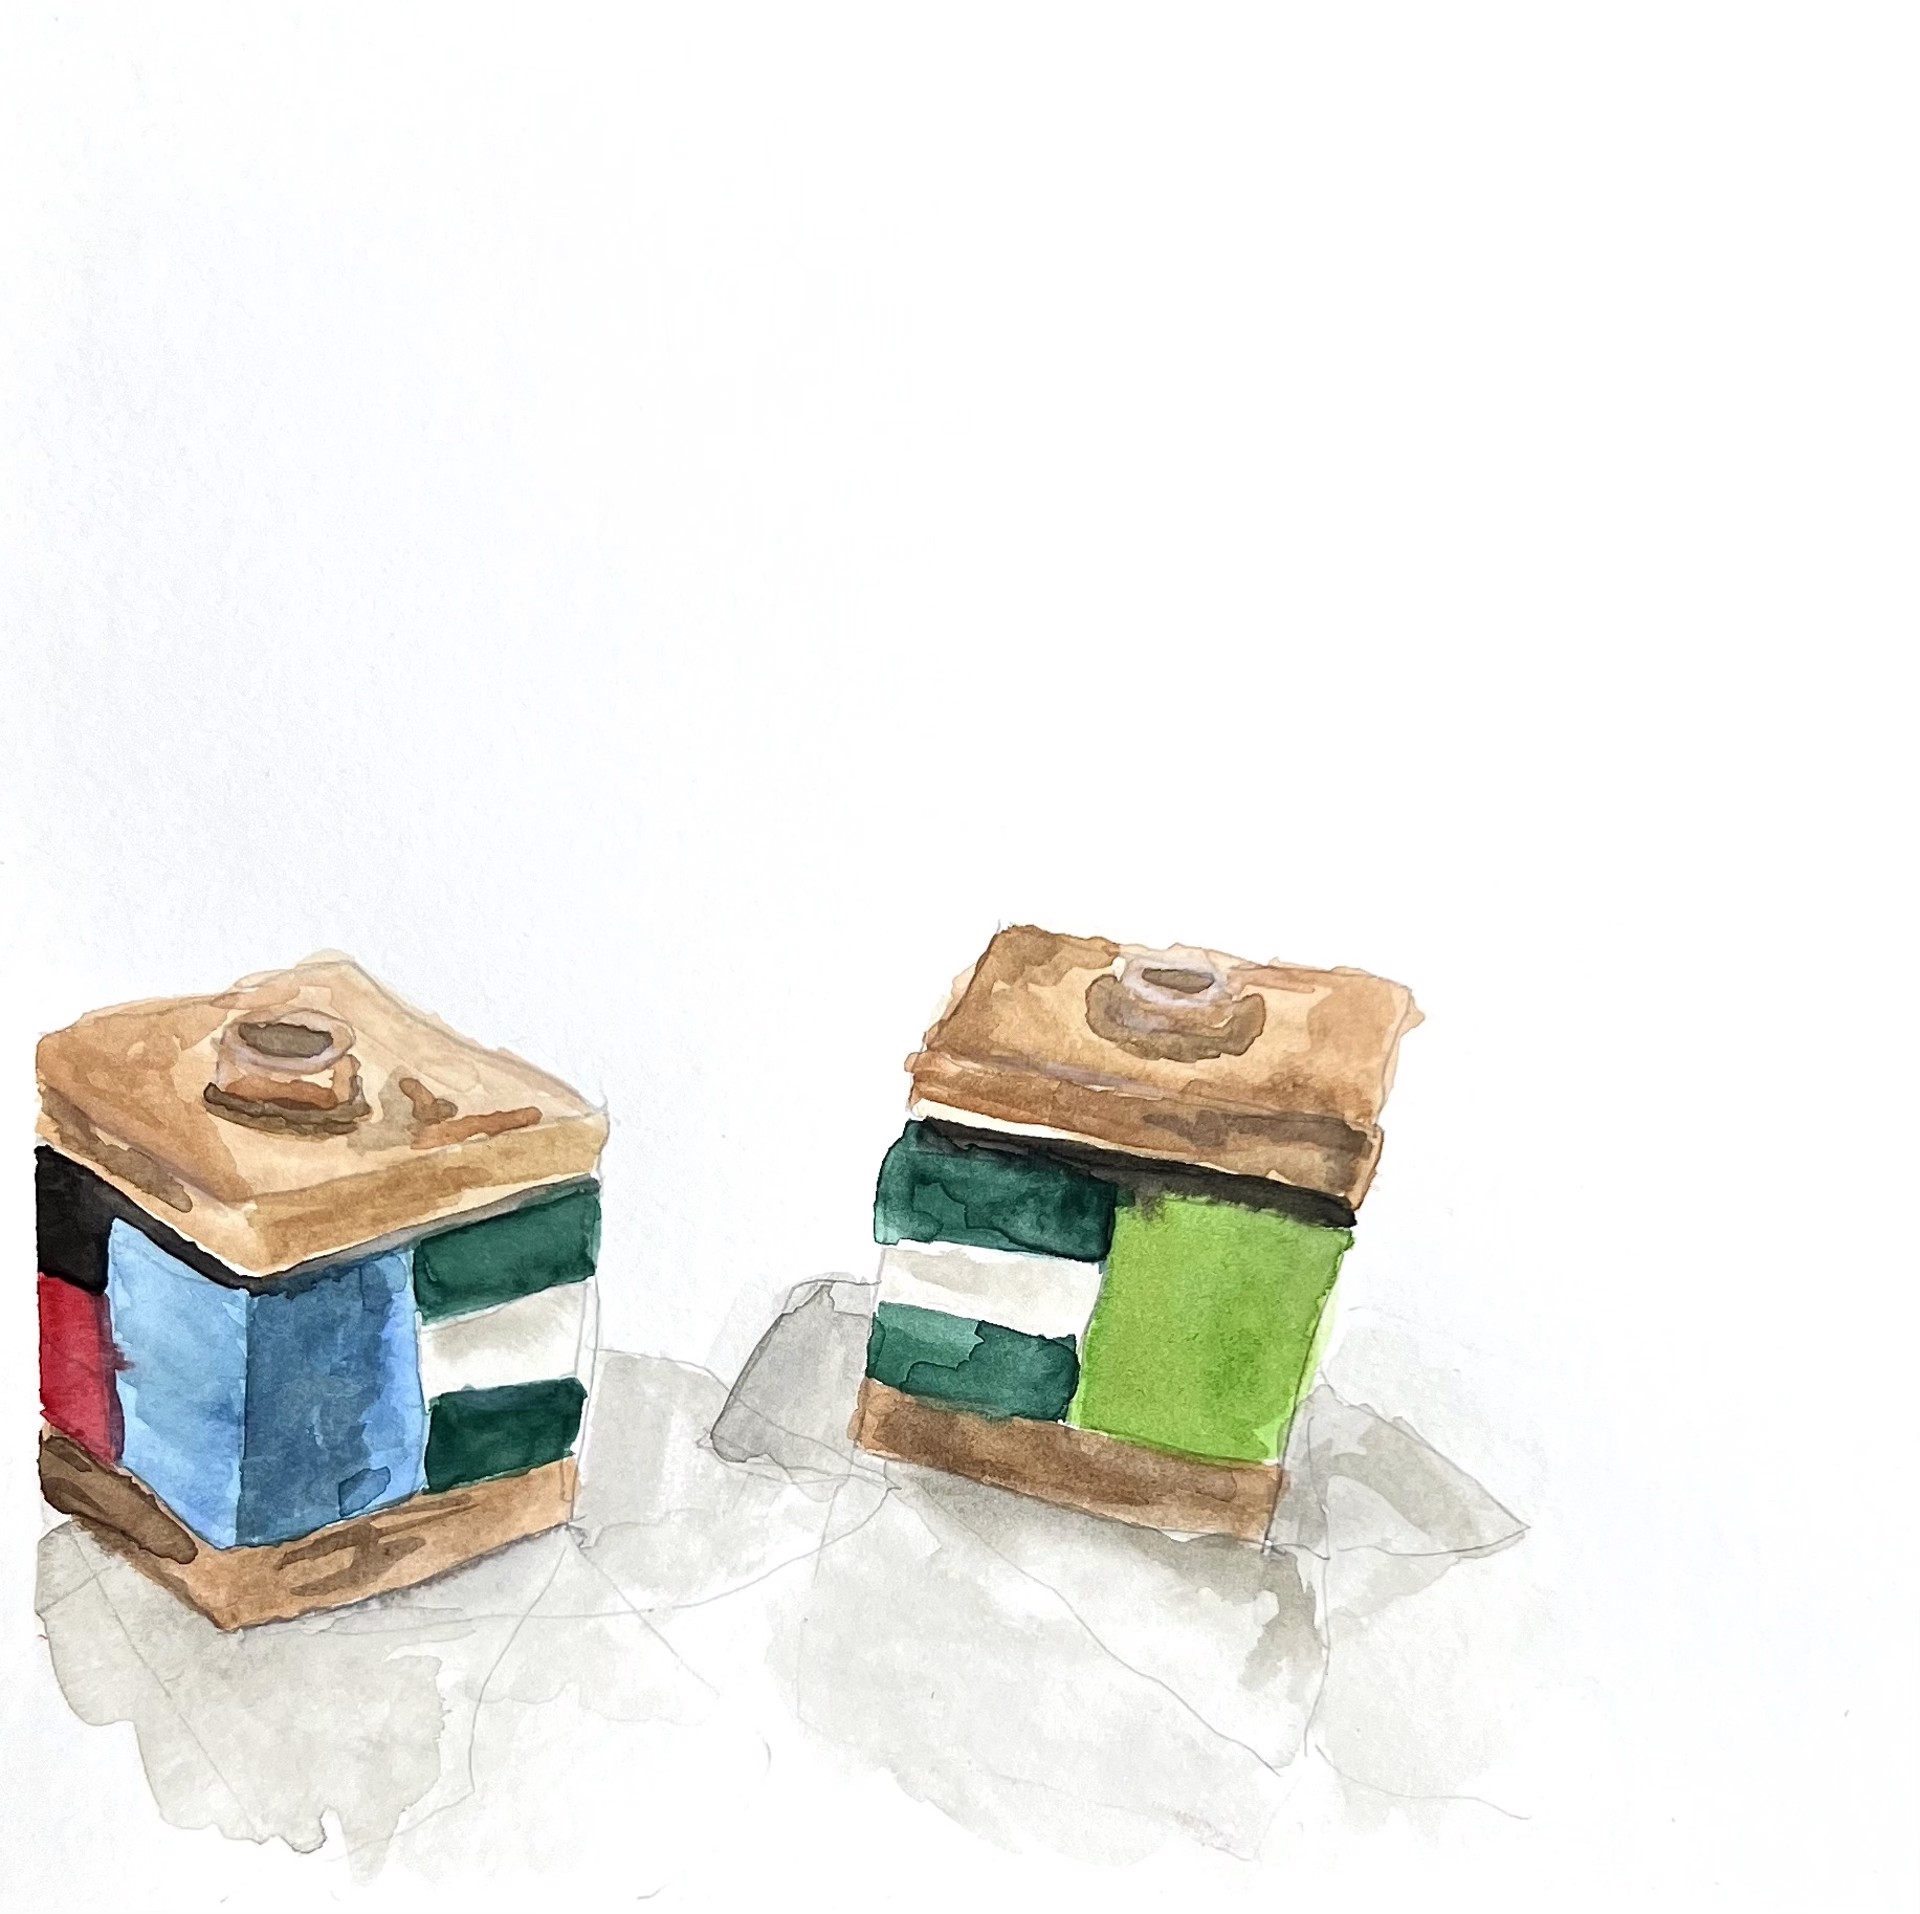 LEGO Study #16 by Kate Fisher